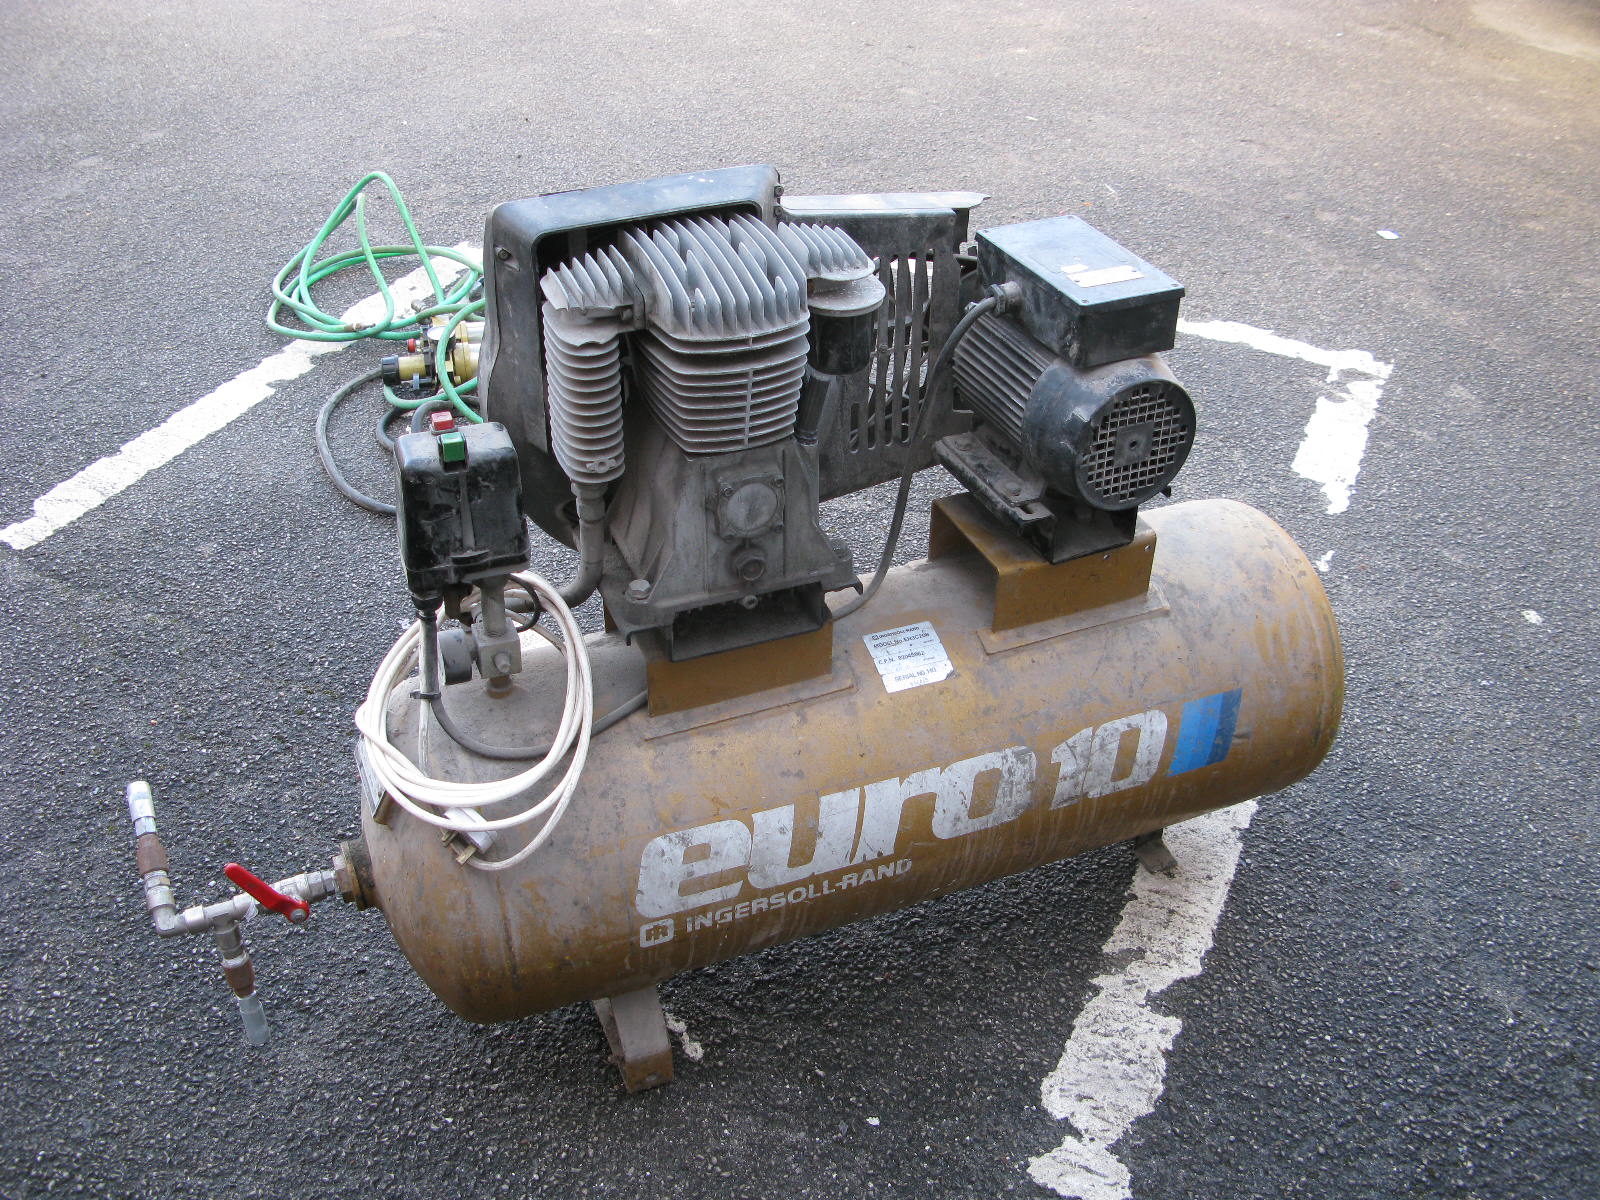 A Euro 10 Ingersold Rand Single Phase Compressor.